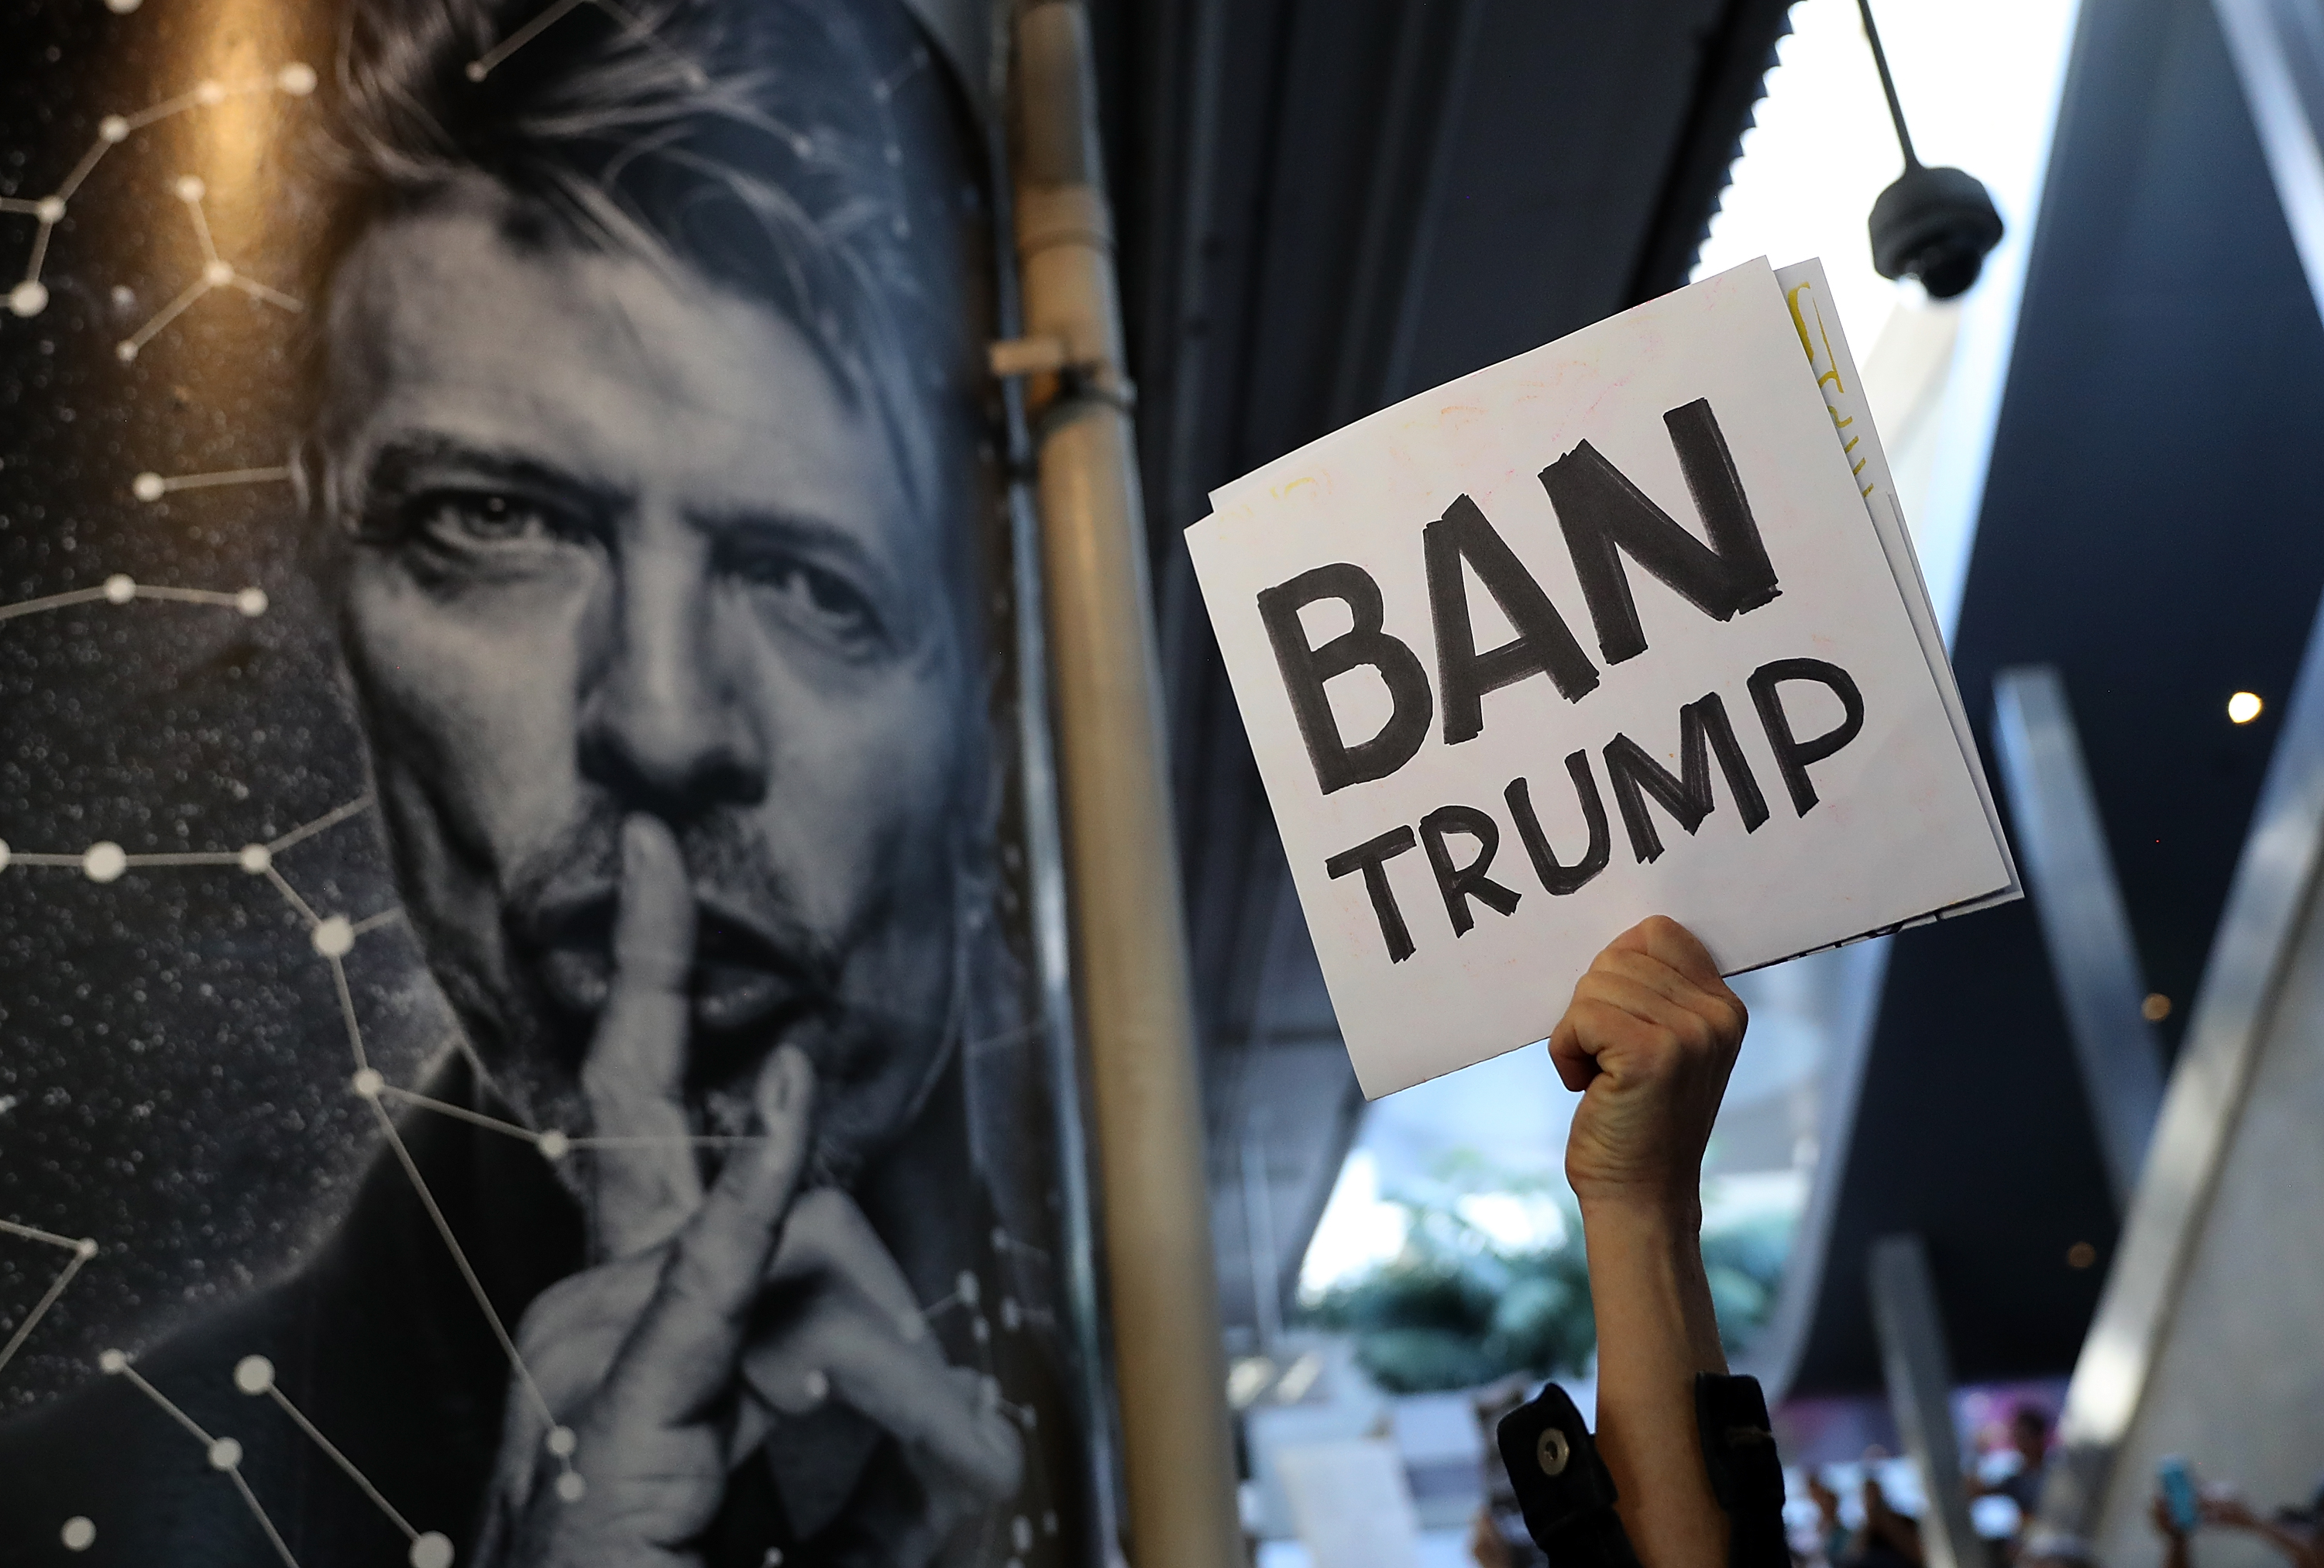 LOS ANGELES, CA - JANUARY 29: A protester holds a sign during a demonstration against the immigration ban that was imposed by U.S. President Donald Trump at Los Angeles International Airport on January 29, 2017 in Los Angeles, California. Thousands of protesters gathered outside of the Tom Bradley International Terminal at Los Angeles International Airport to denounce the travel ban imposed by President Trump. Protests are taking place at airports across the country.   Justin Sullivan/Getty Images/AFP